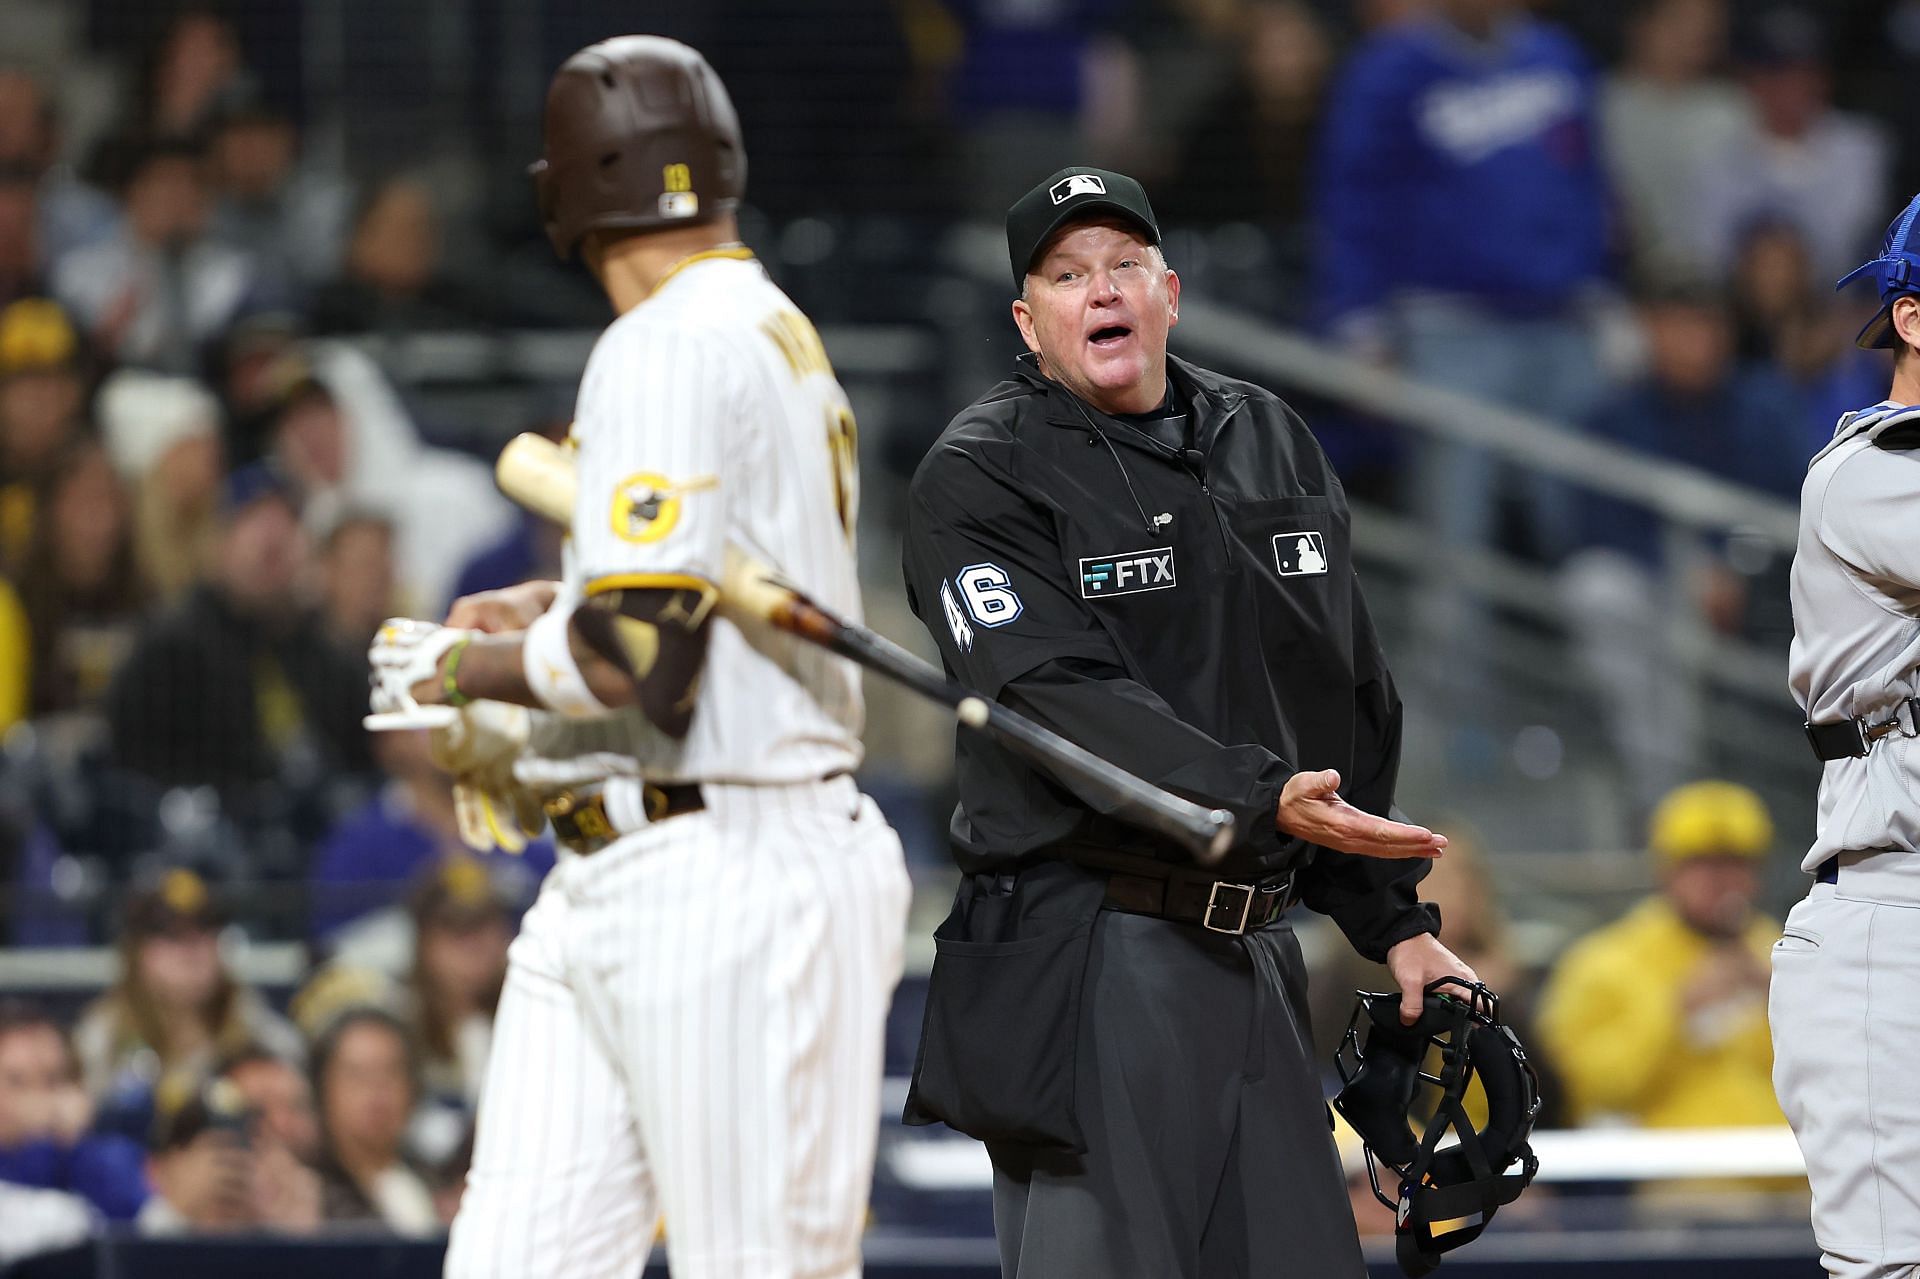 MLB 2022: 5 MLB Umpires in the hot seat